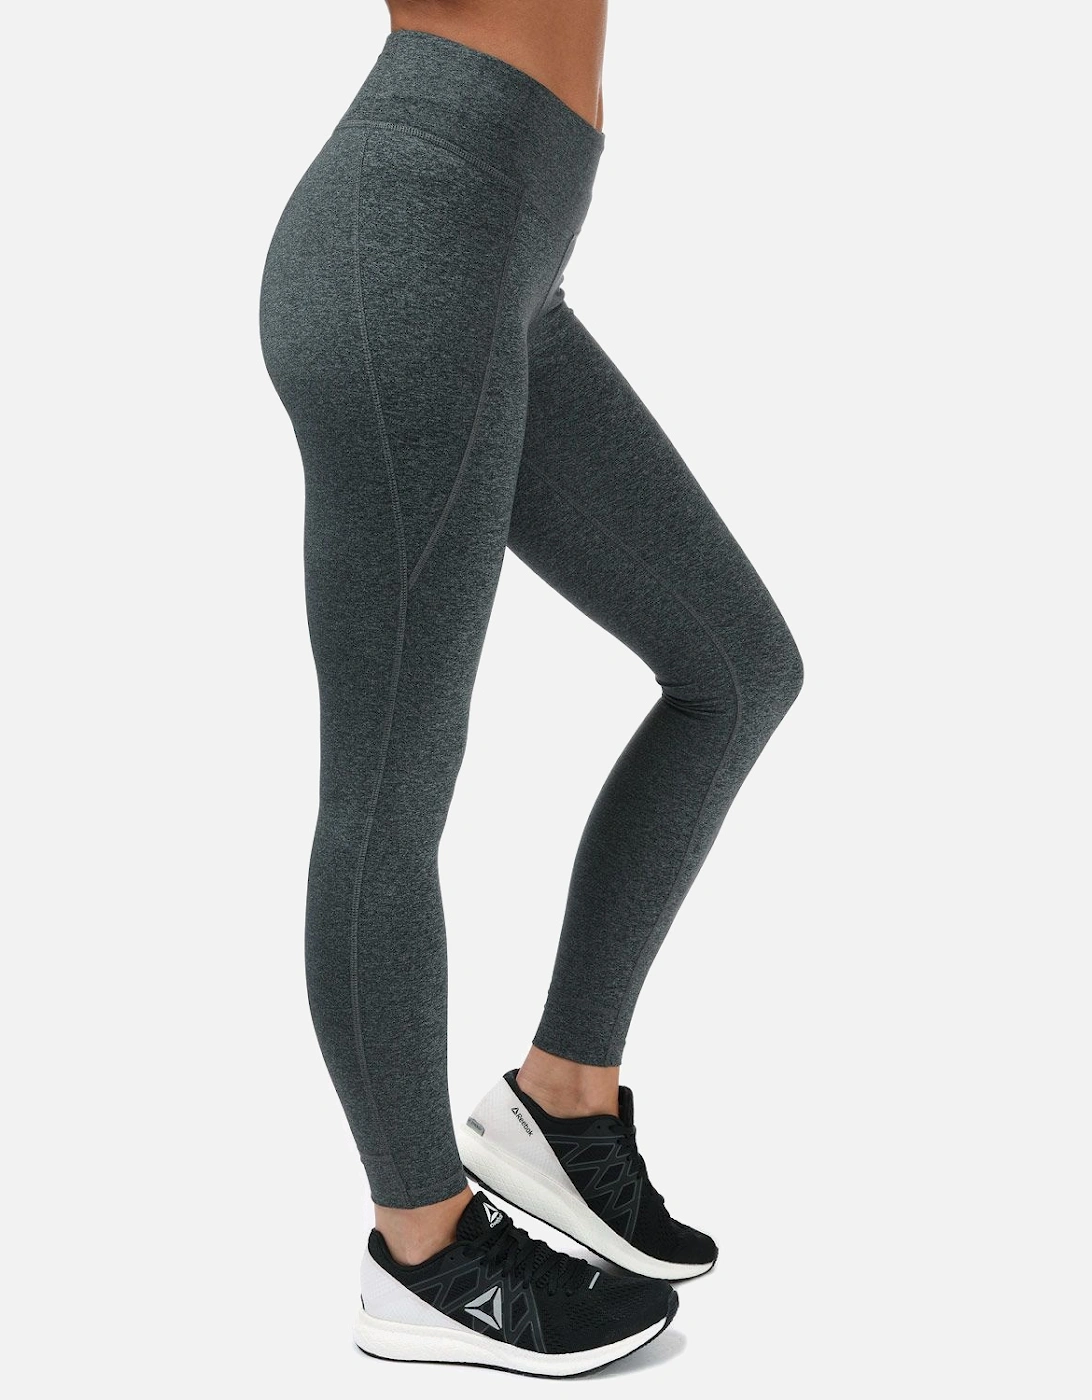 Womens Lux Tights 2.0